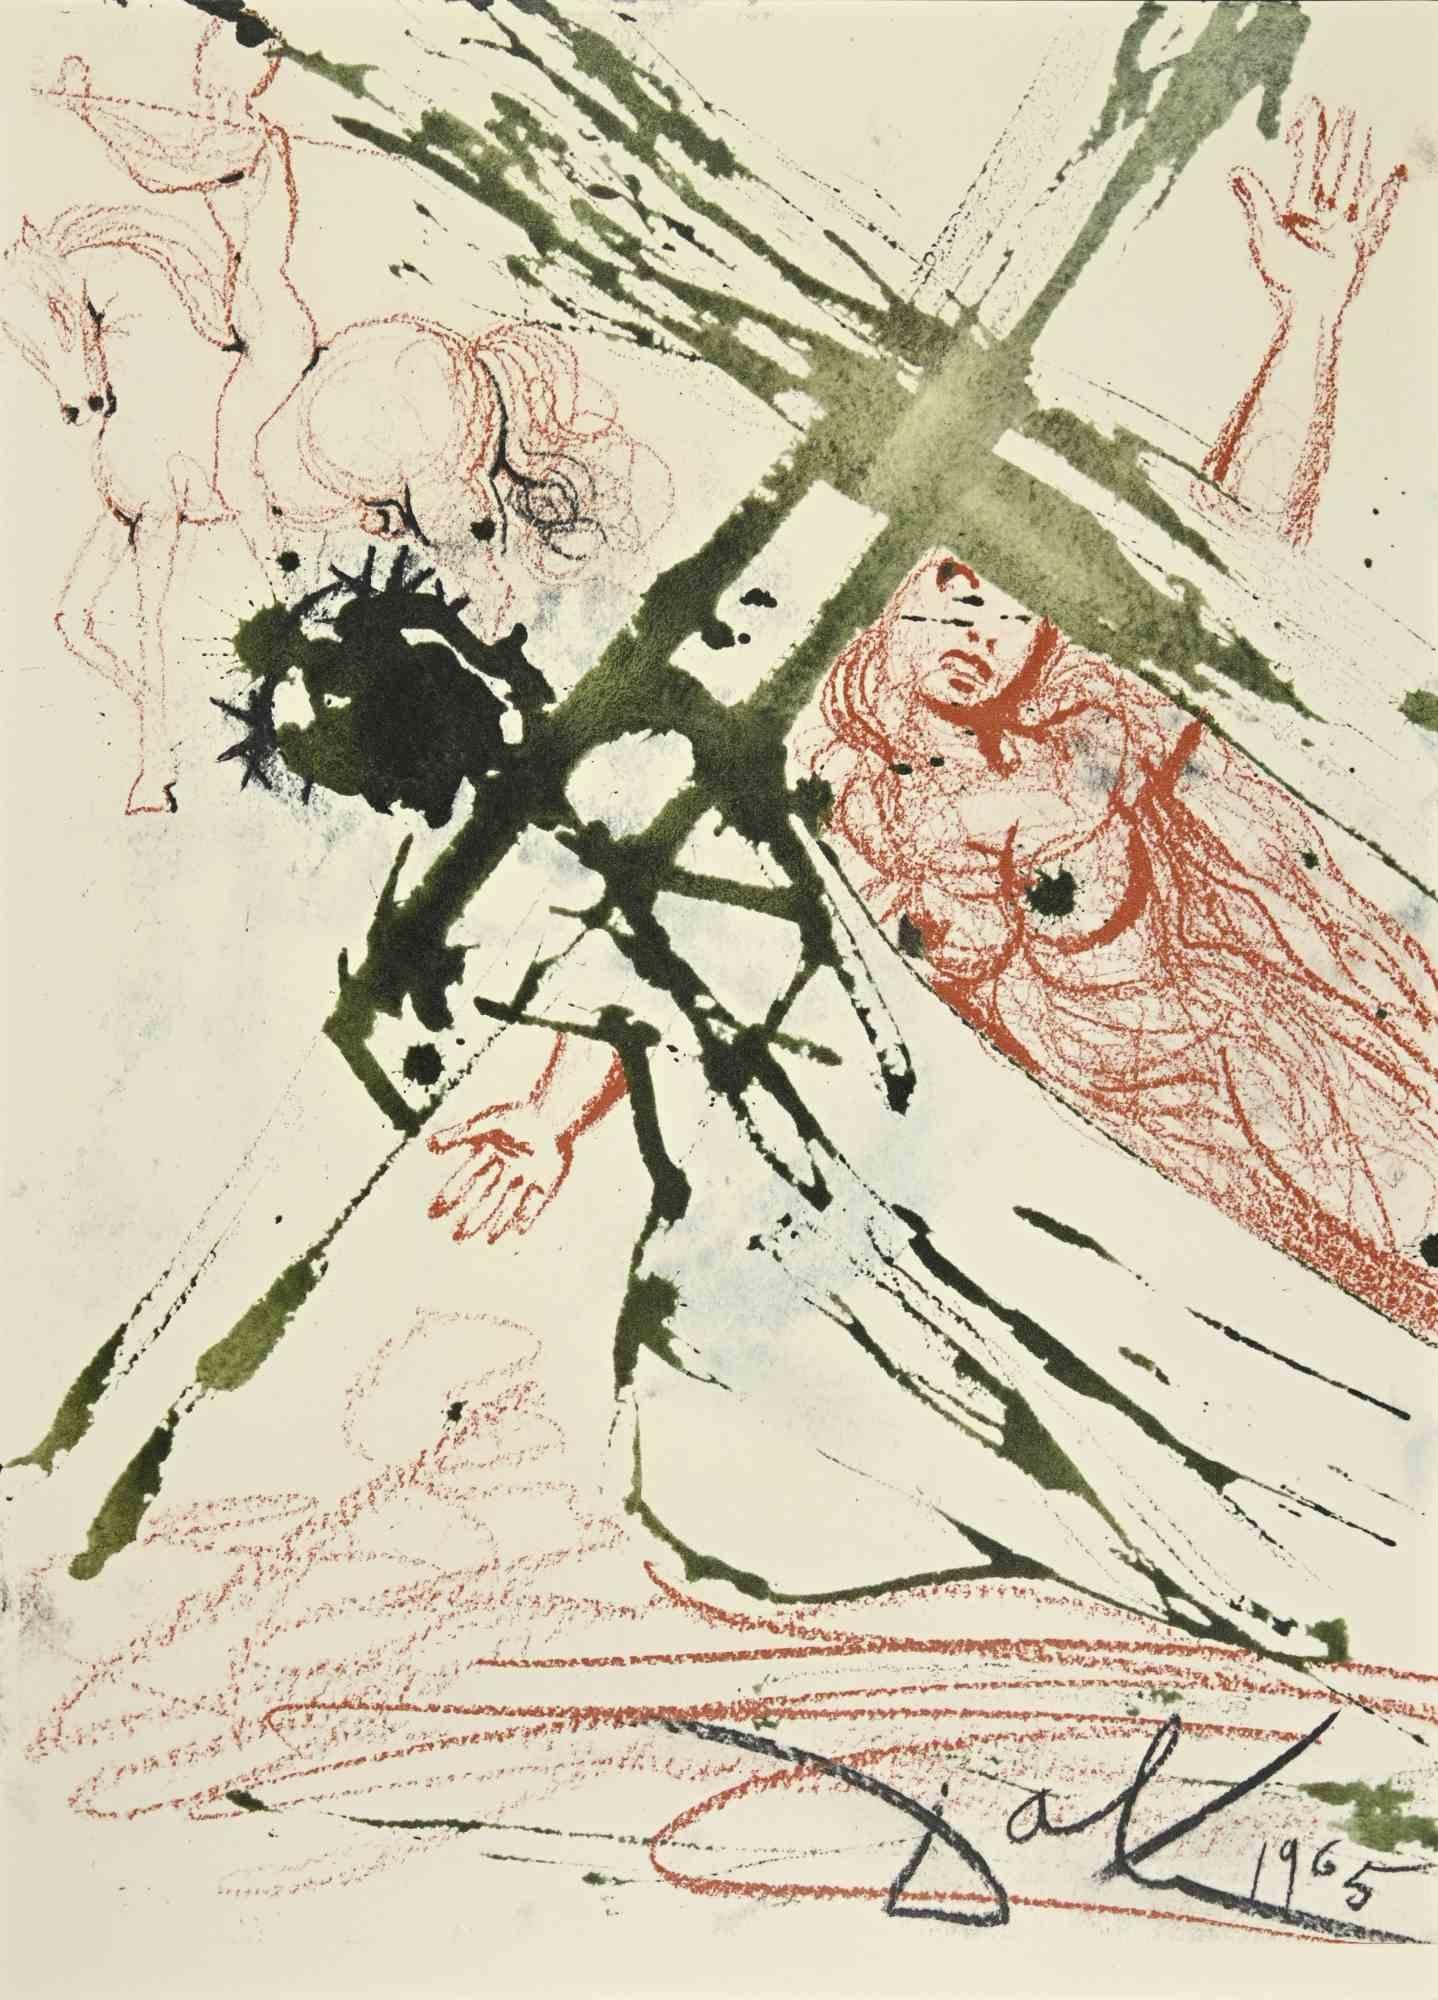 Salvador Dalí Figurative Print - Jesus Carrying The Cross - Lithography - 1964